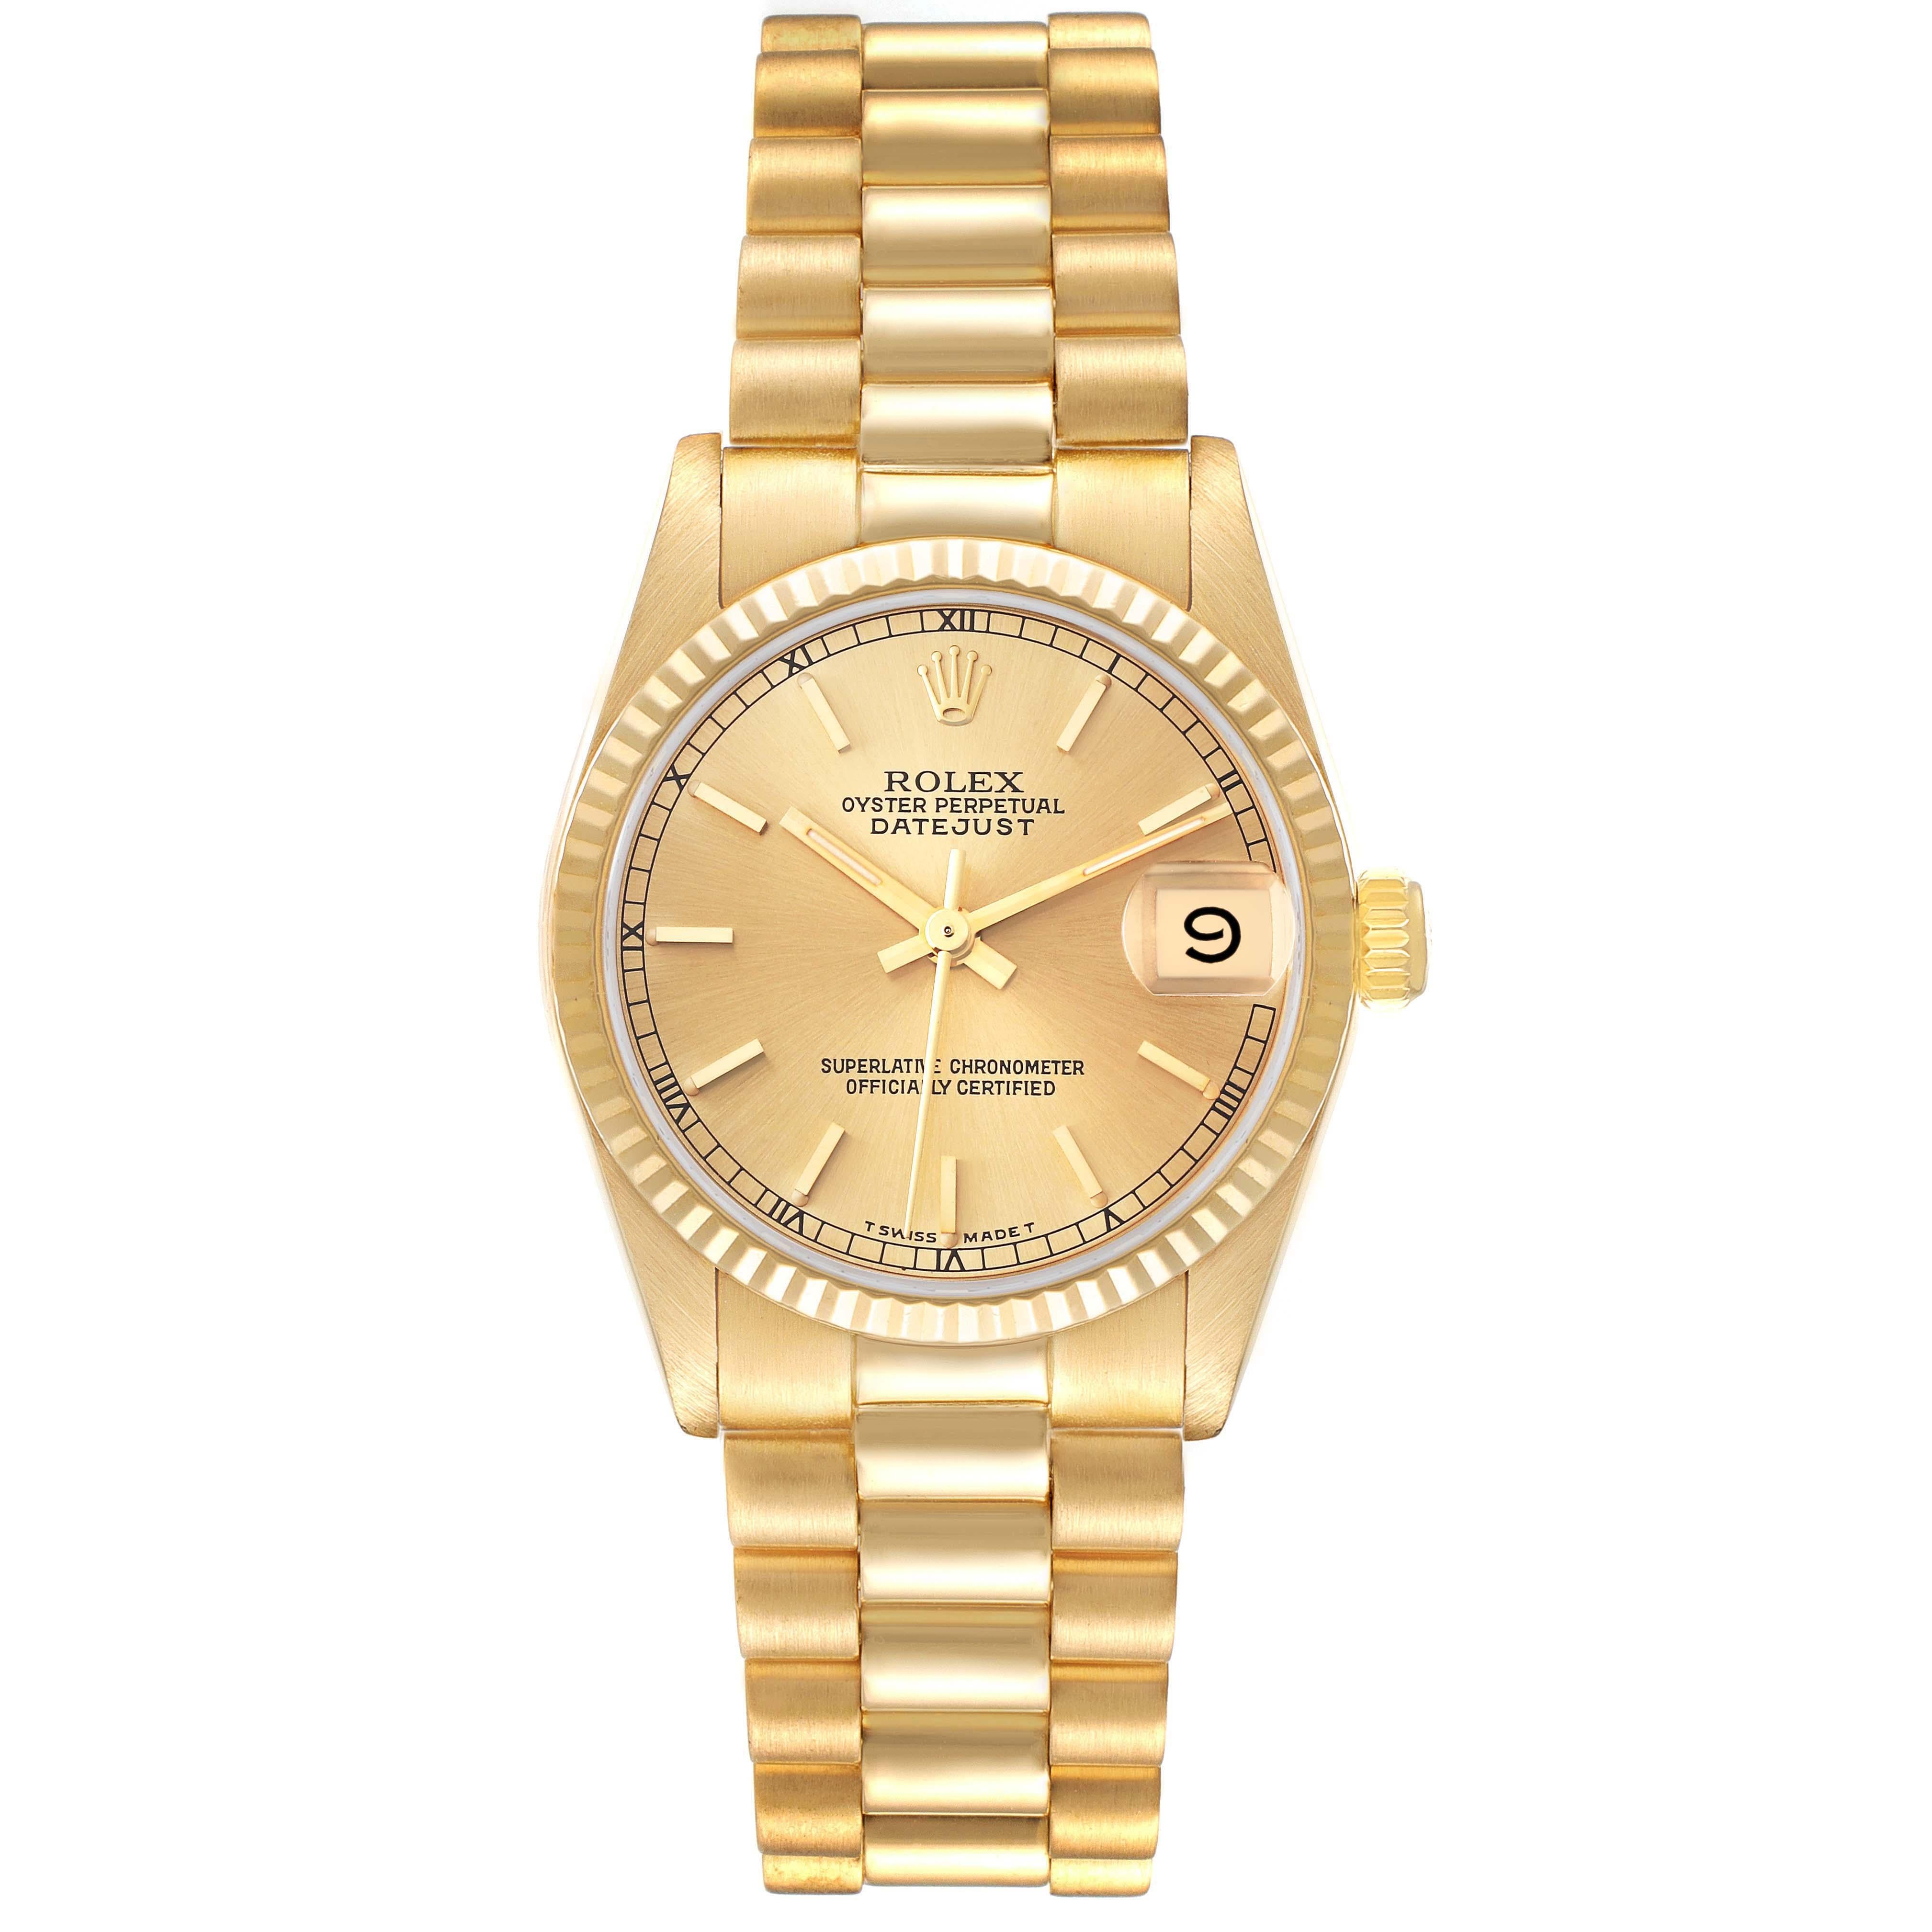 Rolex President Datejust 31 Midsize Yellow Gold Ladies Watch 68278 Box Papers. Officially certified chronometer automatic self-winding movement. 18k yellow gold oyster case 31.0 mm in diameter. Rolex logo on a crown. 18k yellow gold fluted bezel.